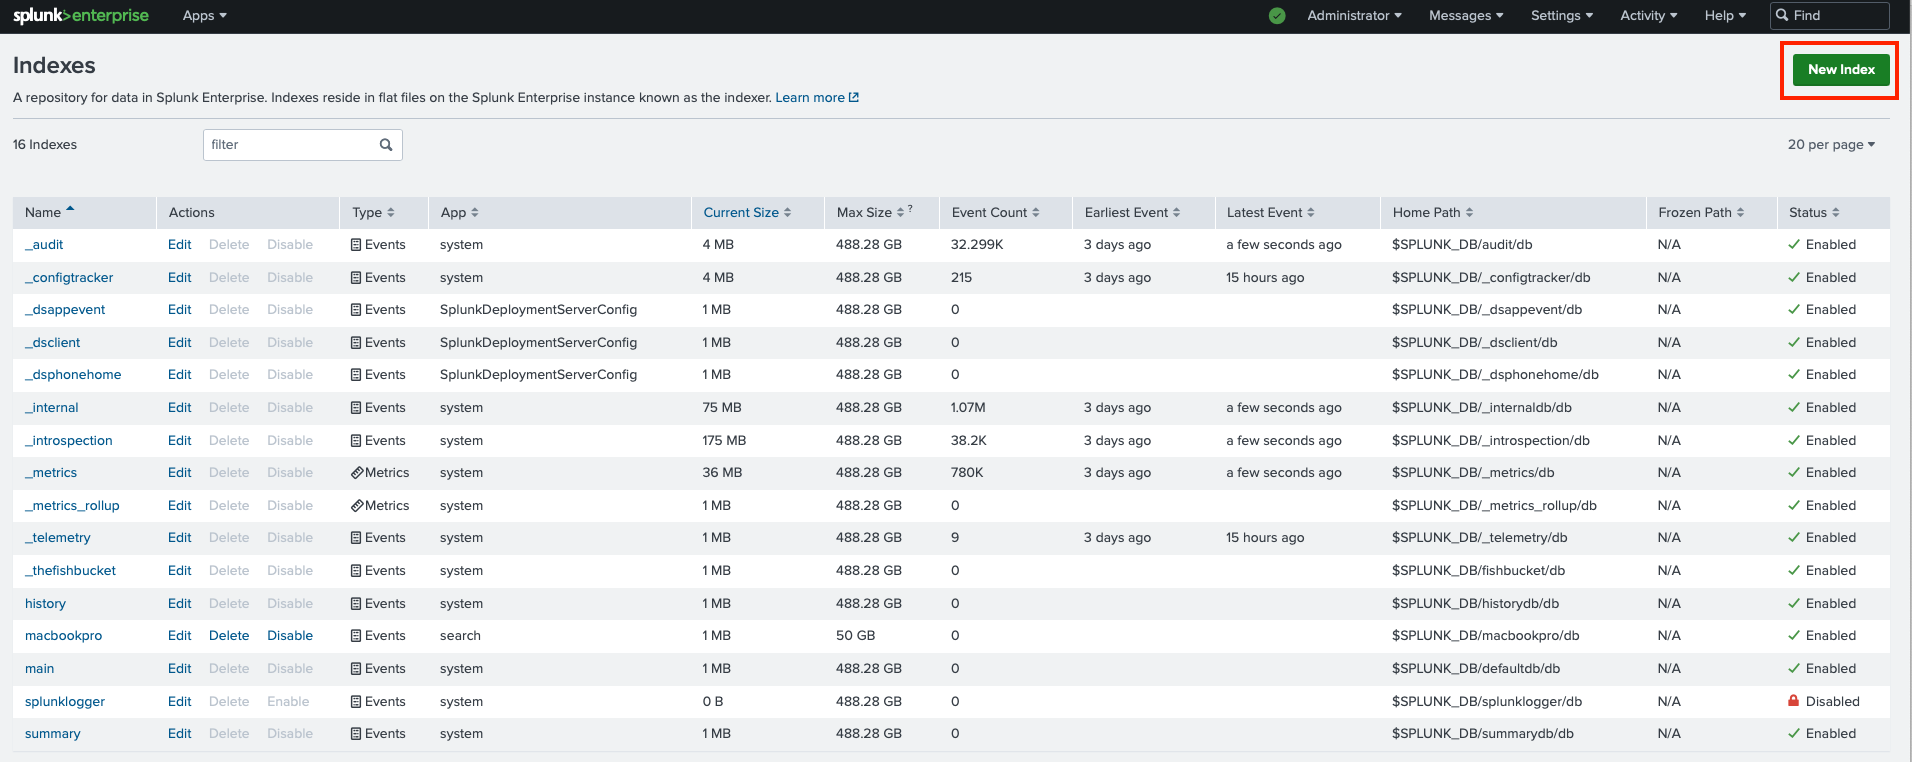 Screenshot of the Splunk Enterprise index management screen, displaying a list of various data indexes with detailed statistics.